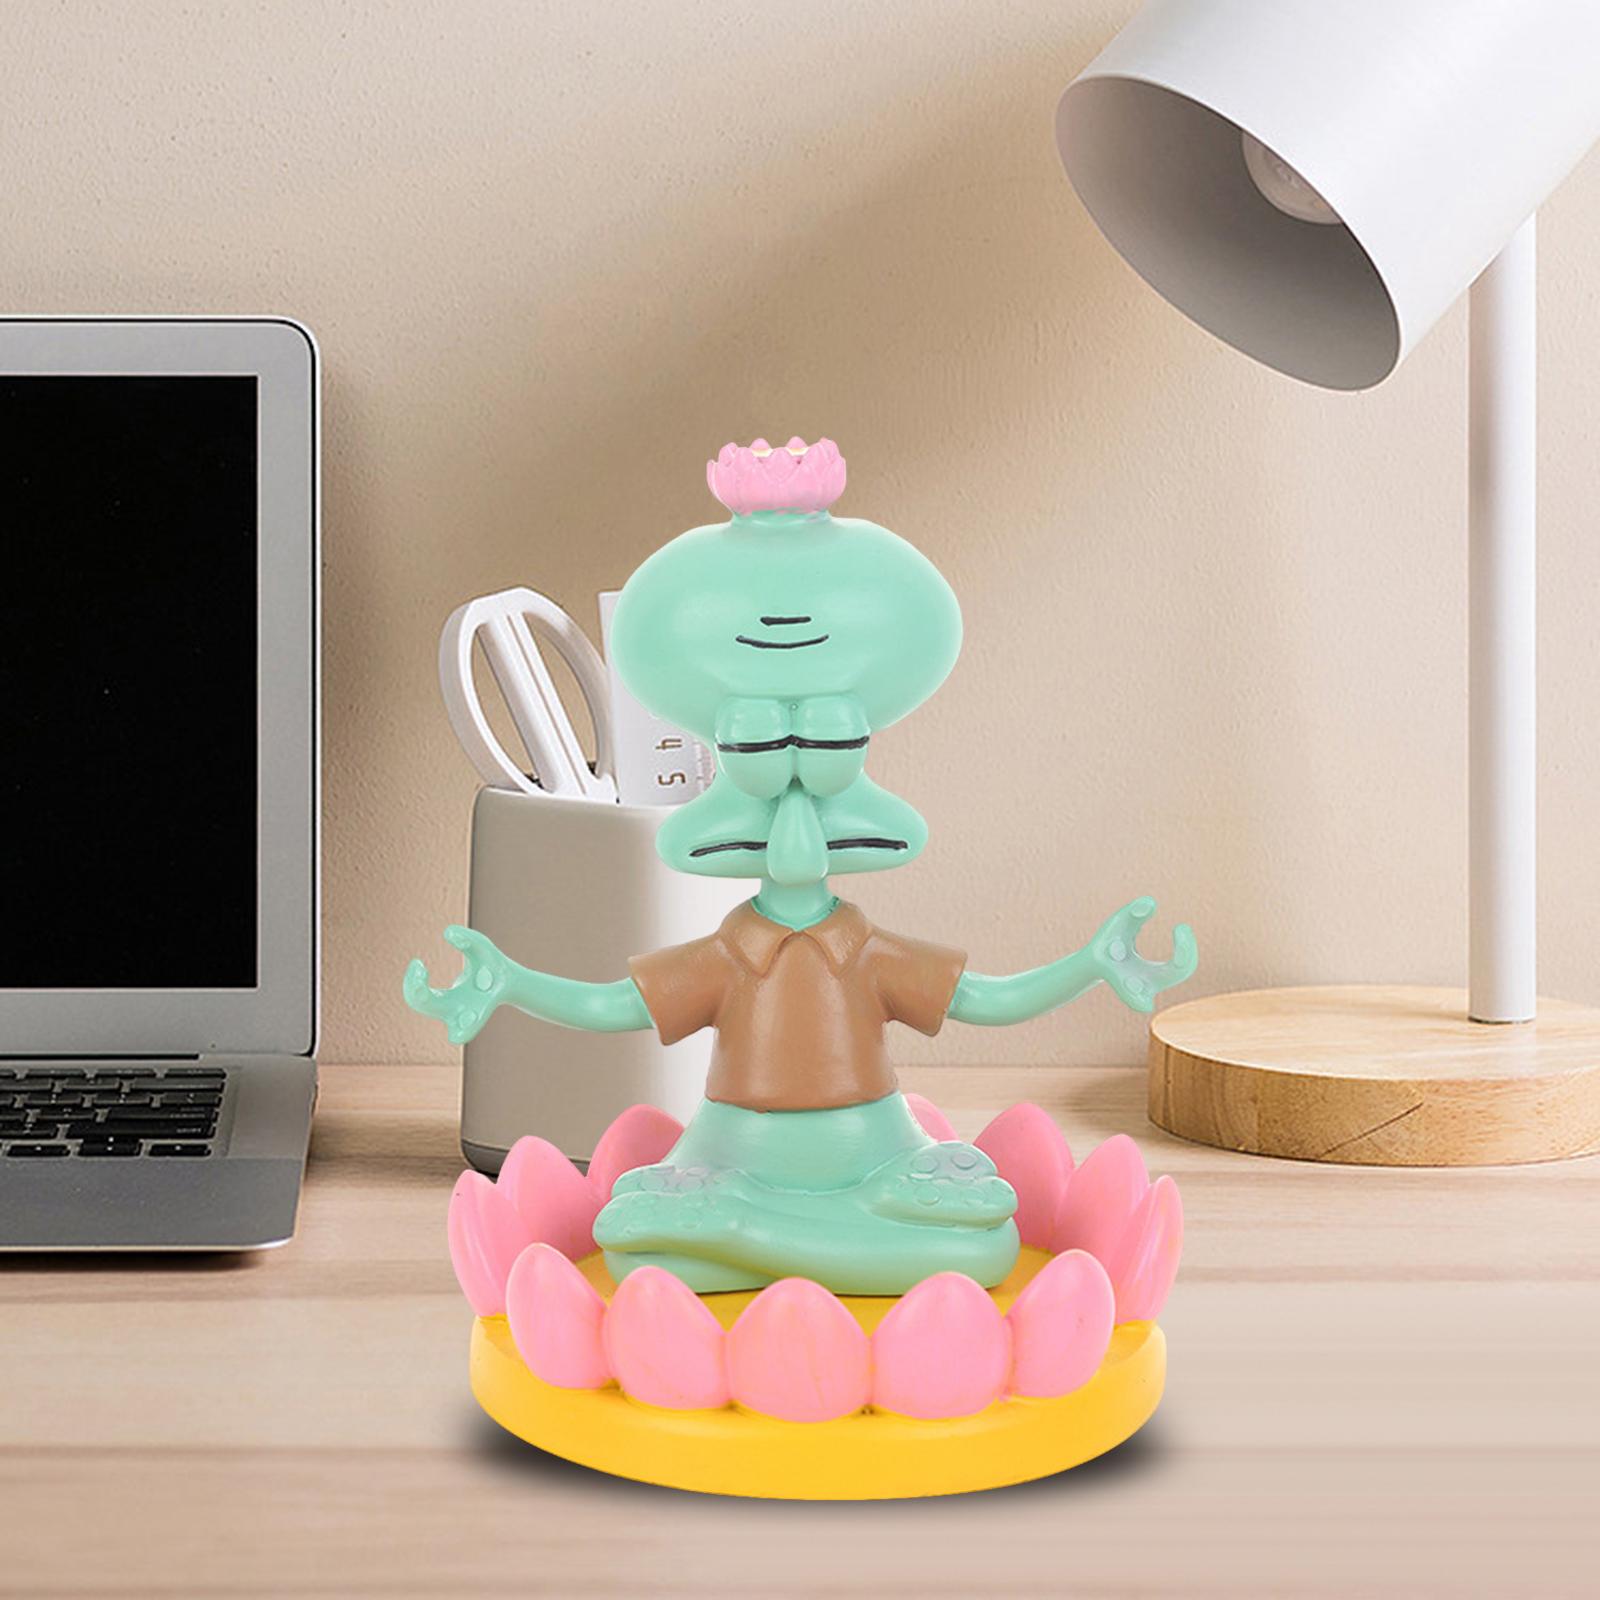 Squidward Mobile Phone Holder Resin Crafts Bracket Cell Phone Stand for Desk